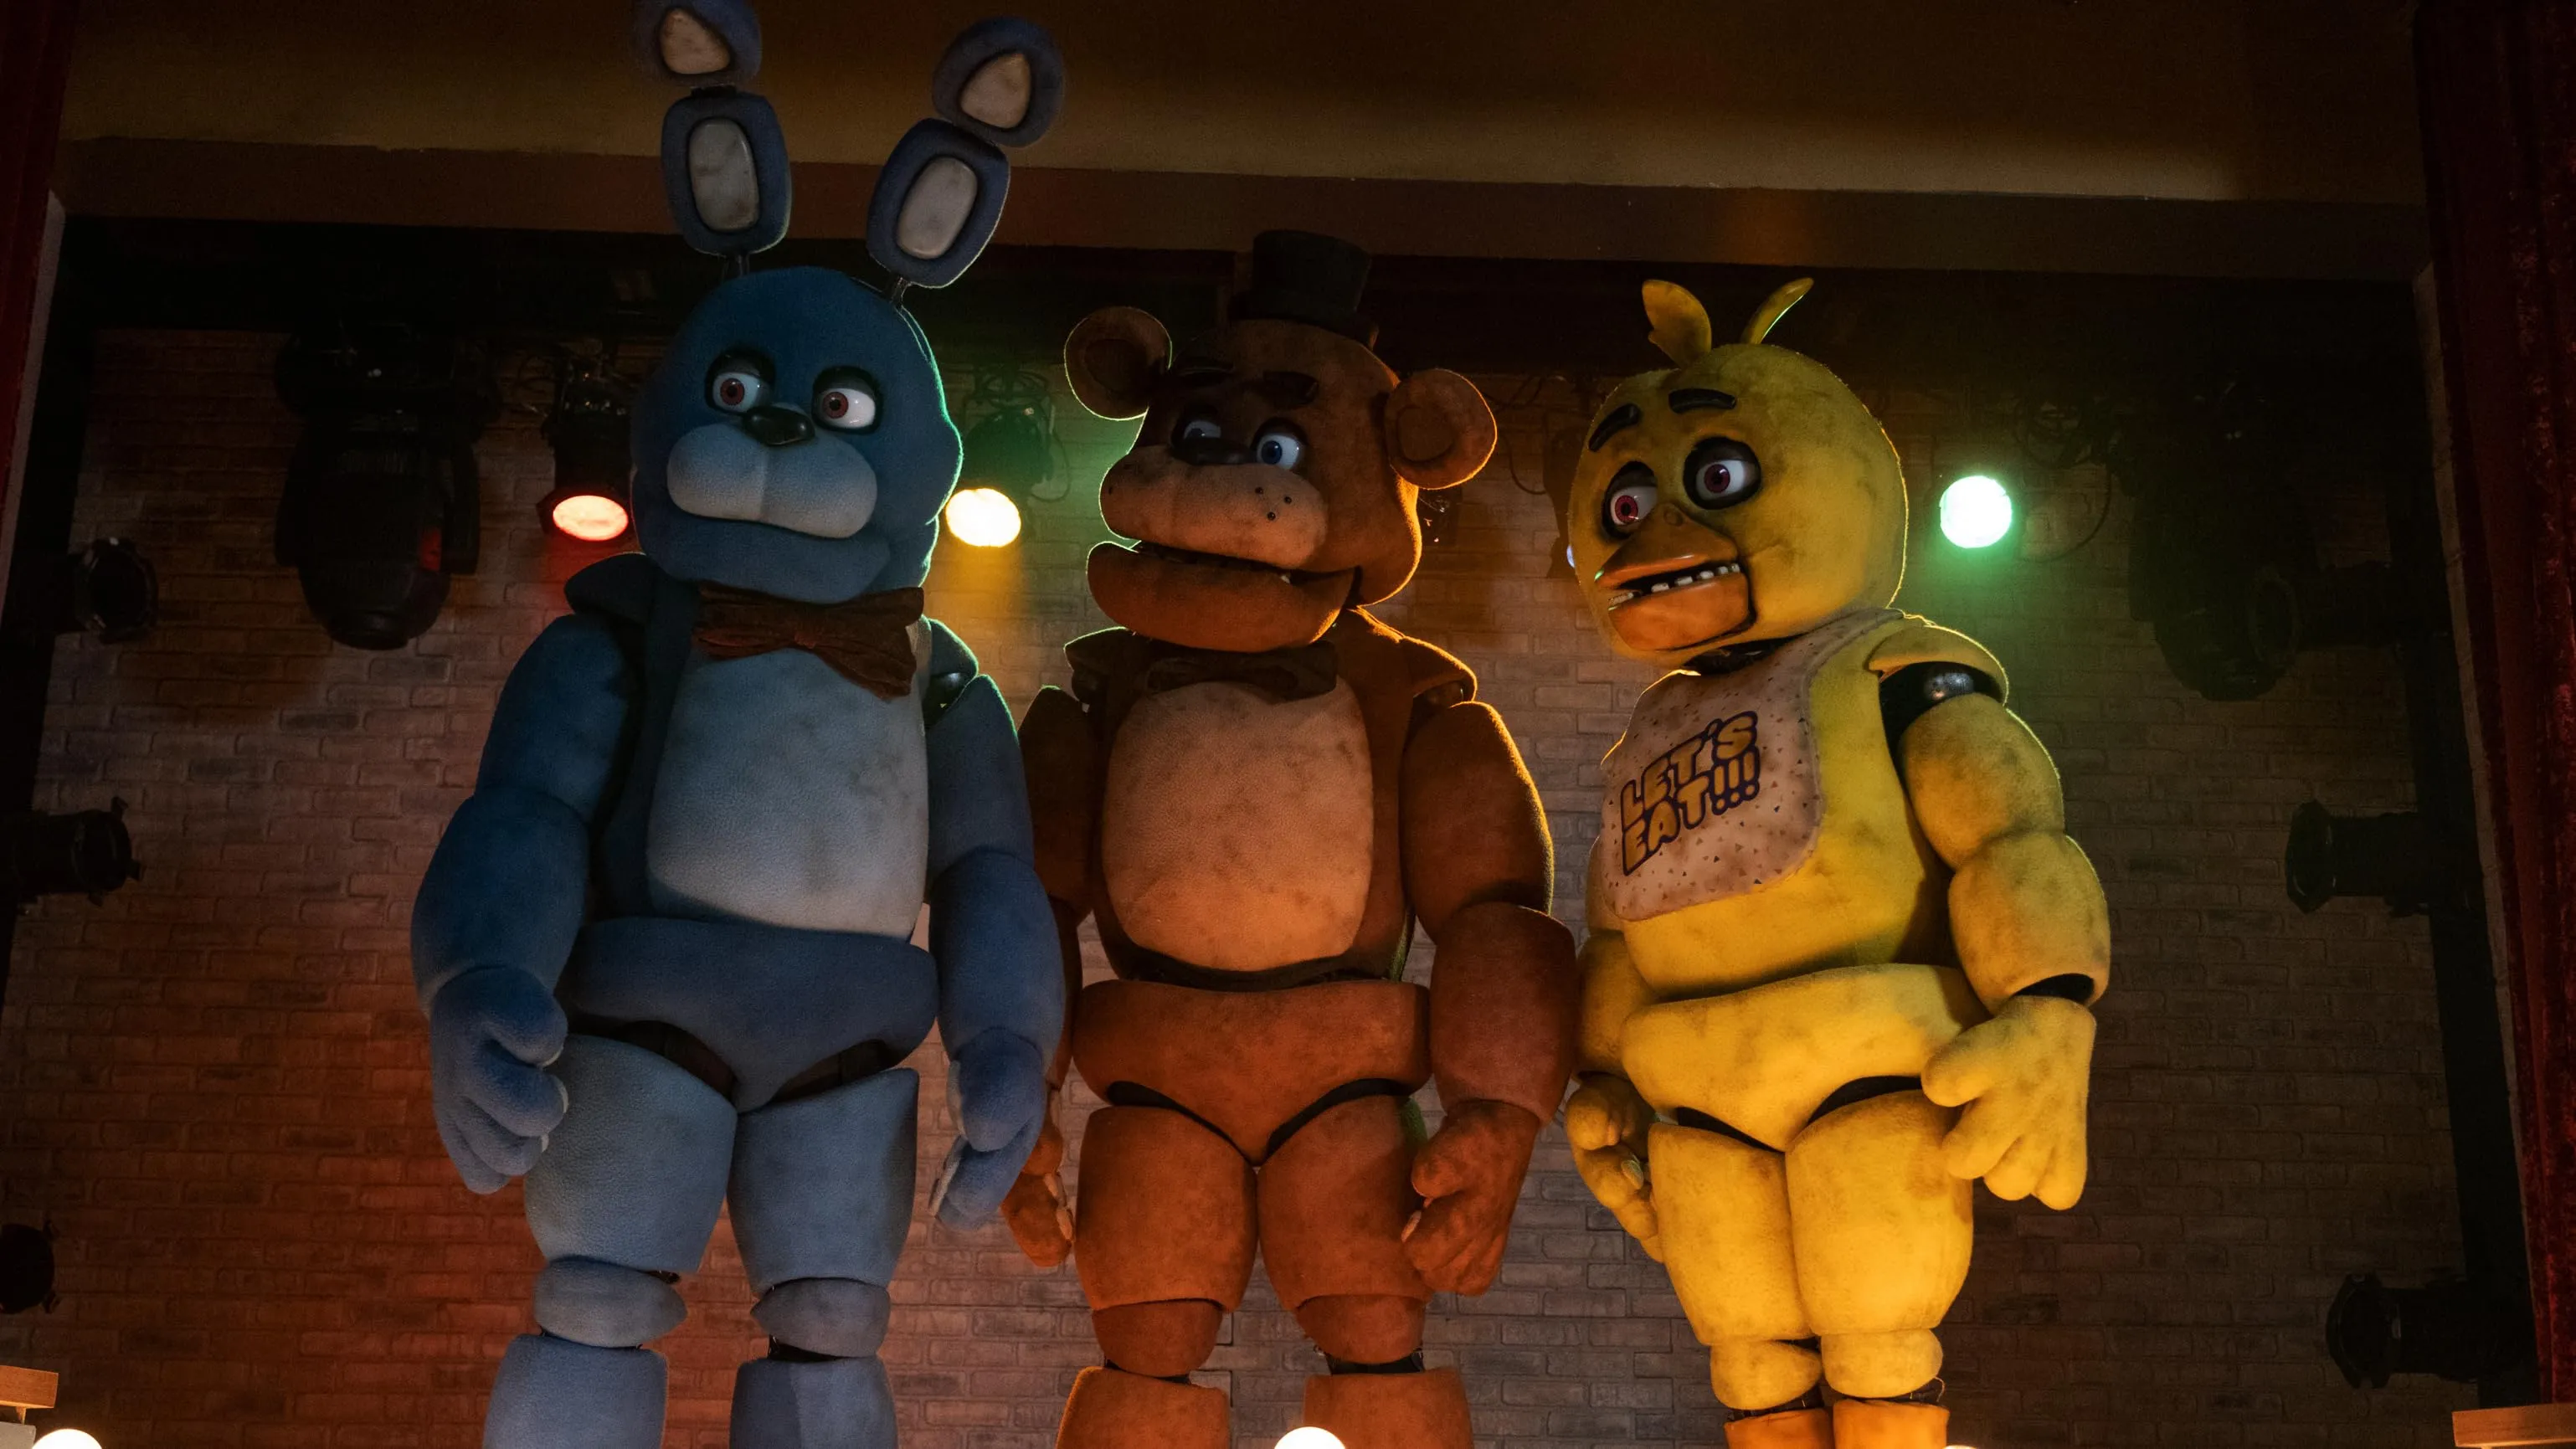 Five Nights at Freddy’s Trailer Shows Off Animatronic Monsters